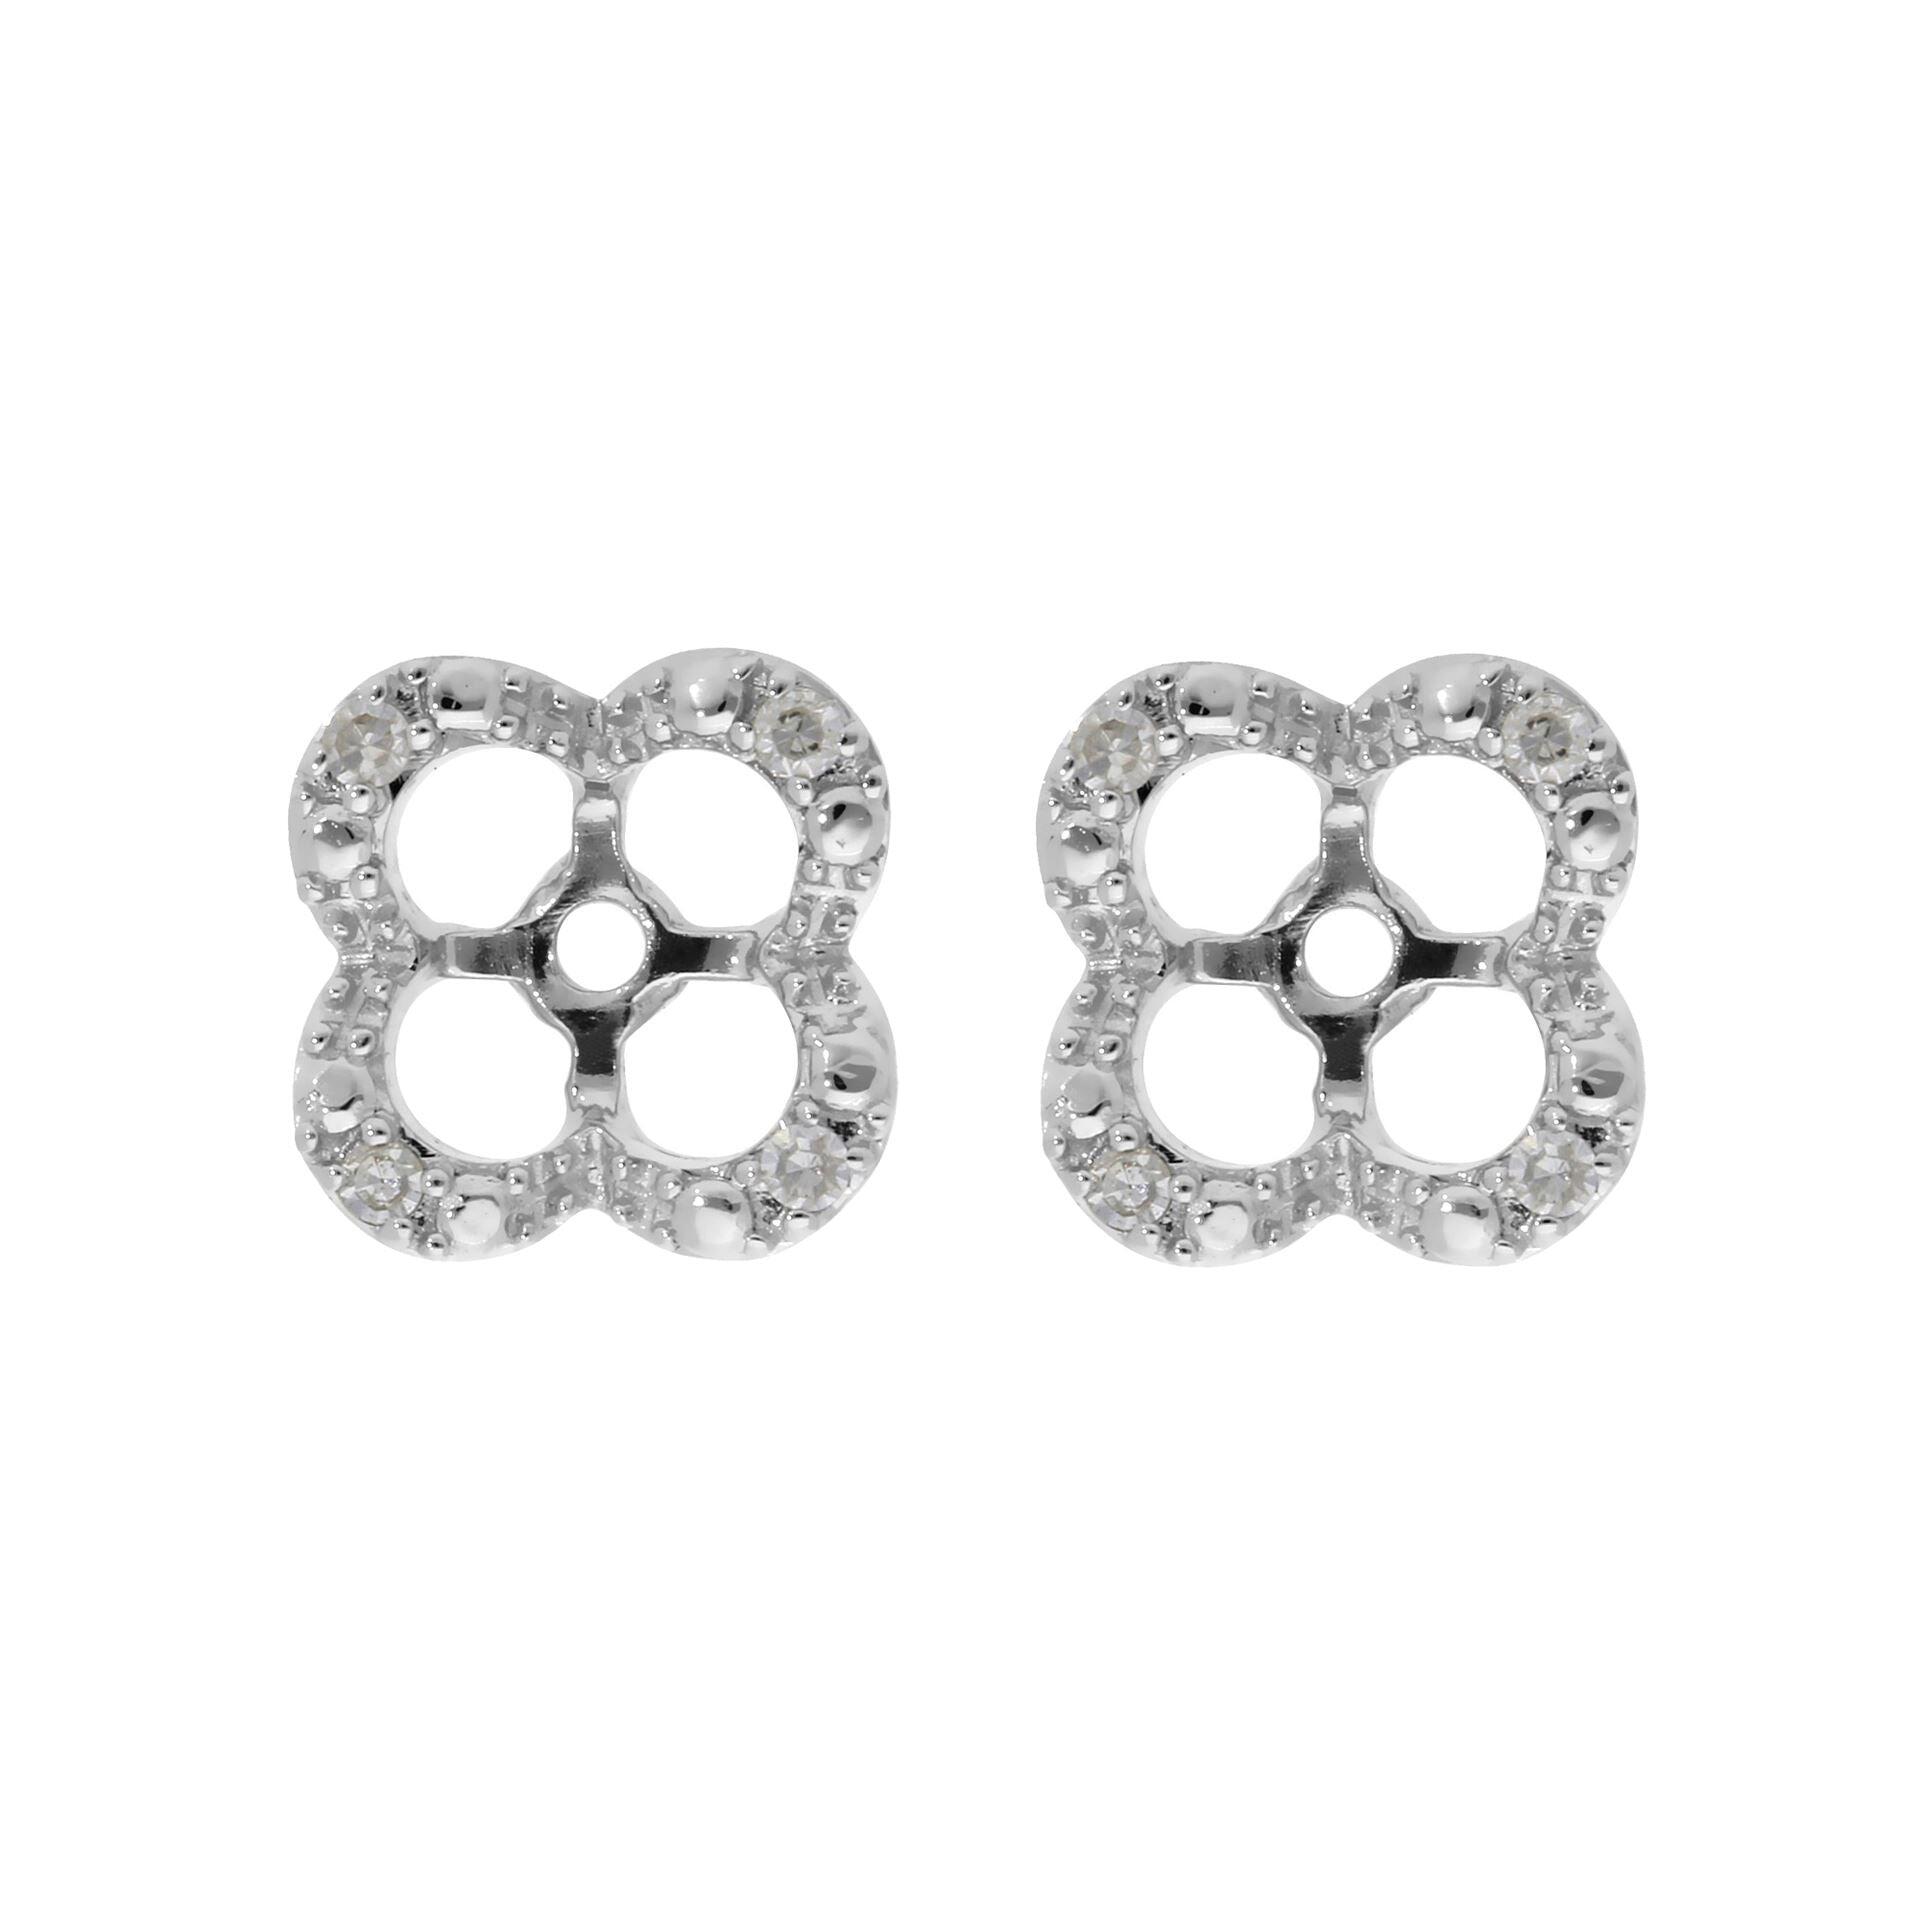 Floral Round Diamond Clover Shape Earrings Jacked in 9ct White Gold